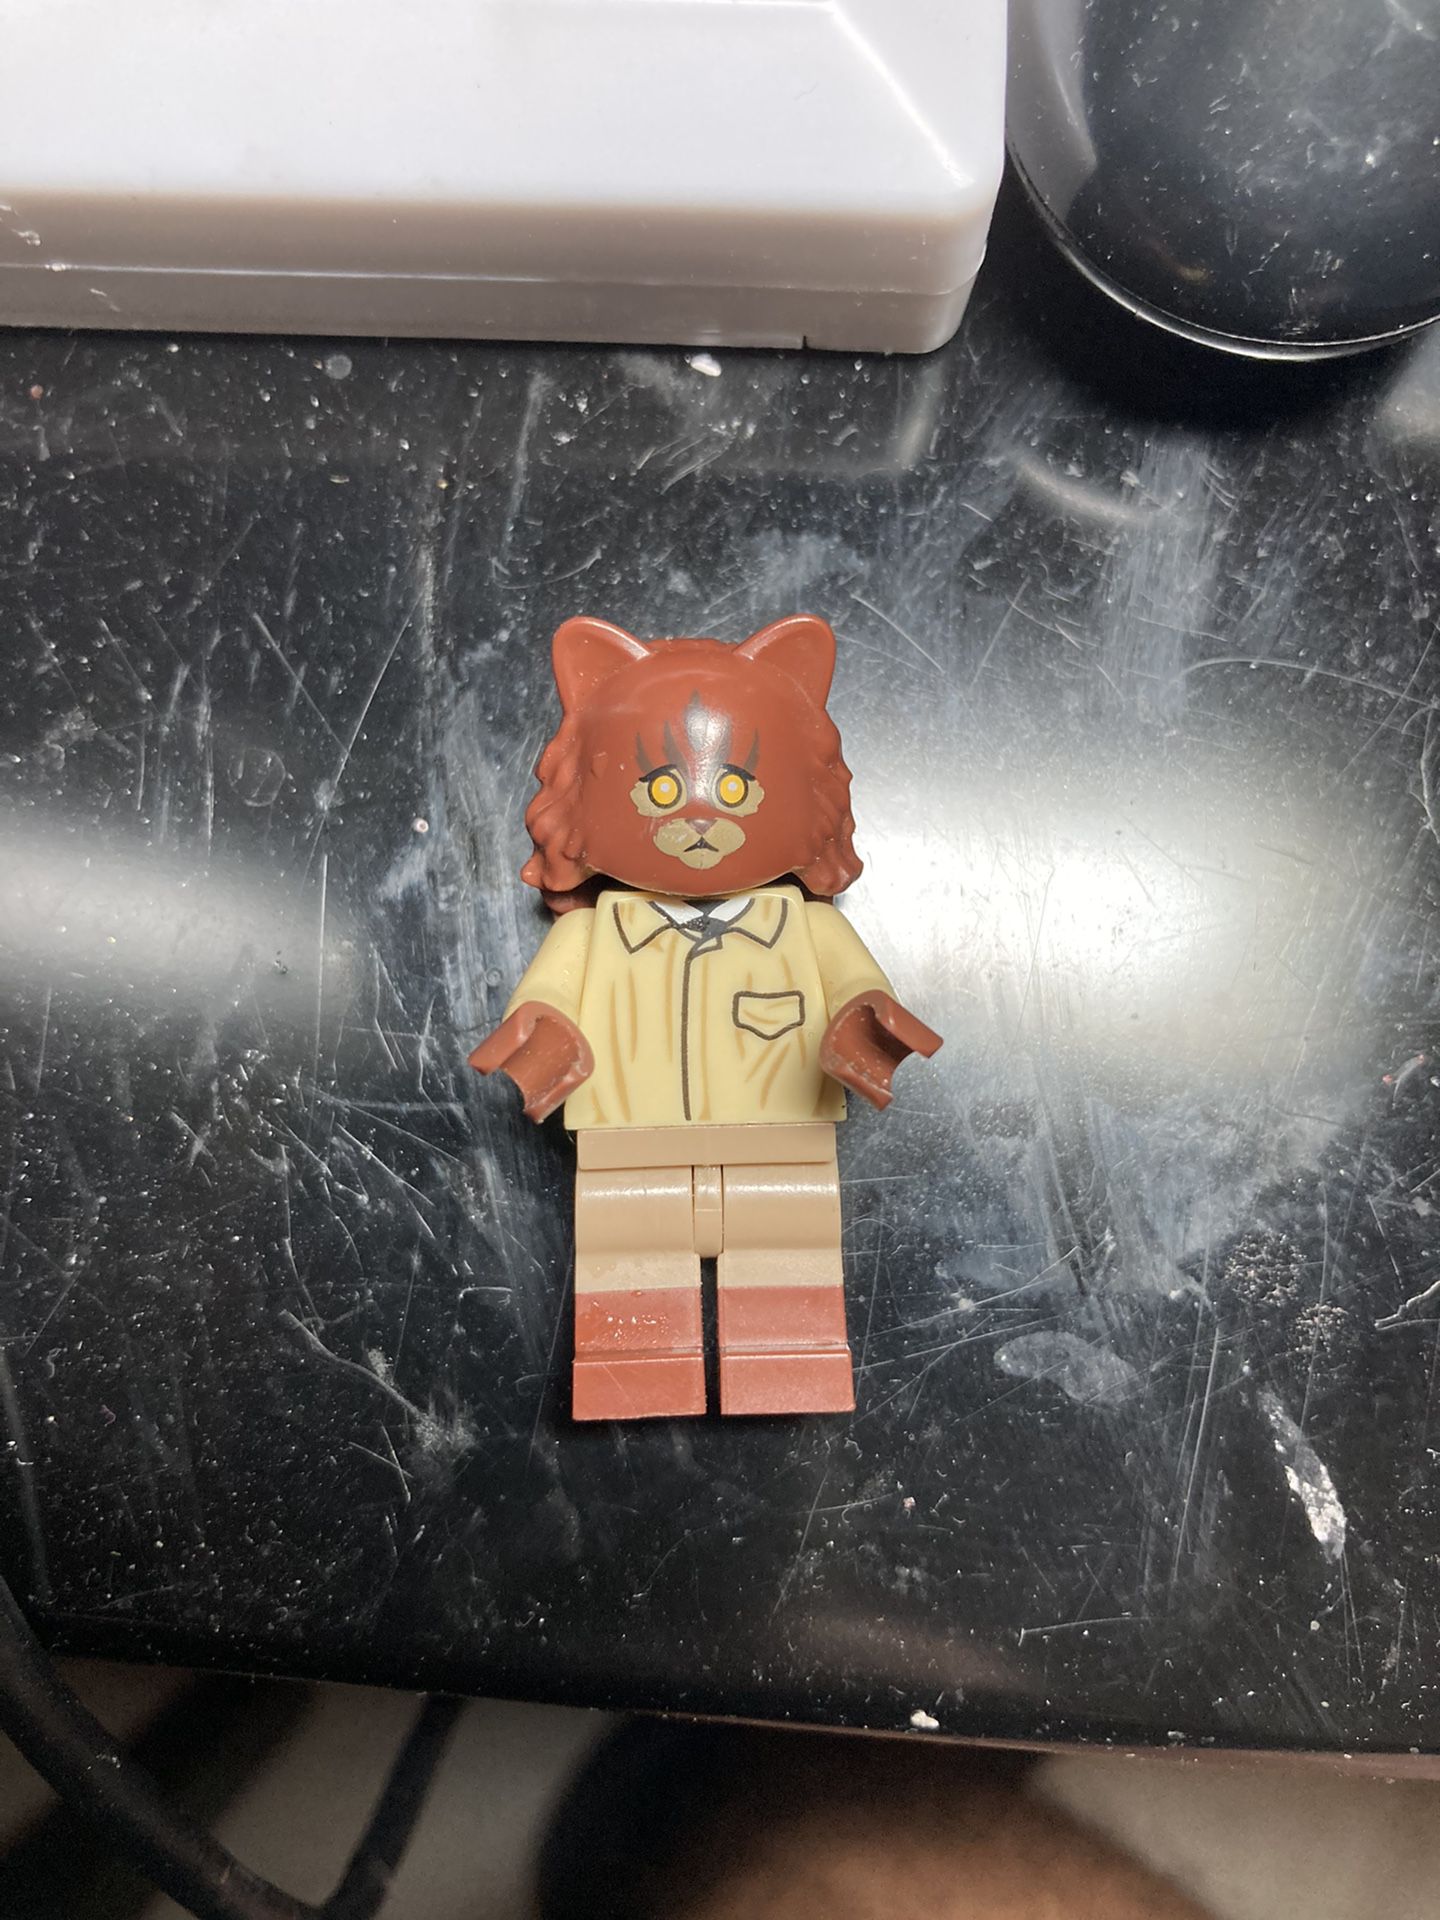 Hermione Granger LEGO As Cat With Harry Potter Head